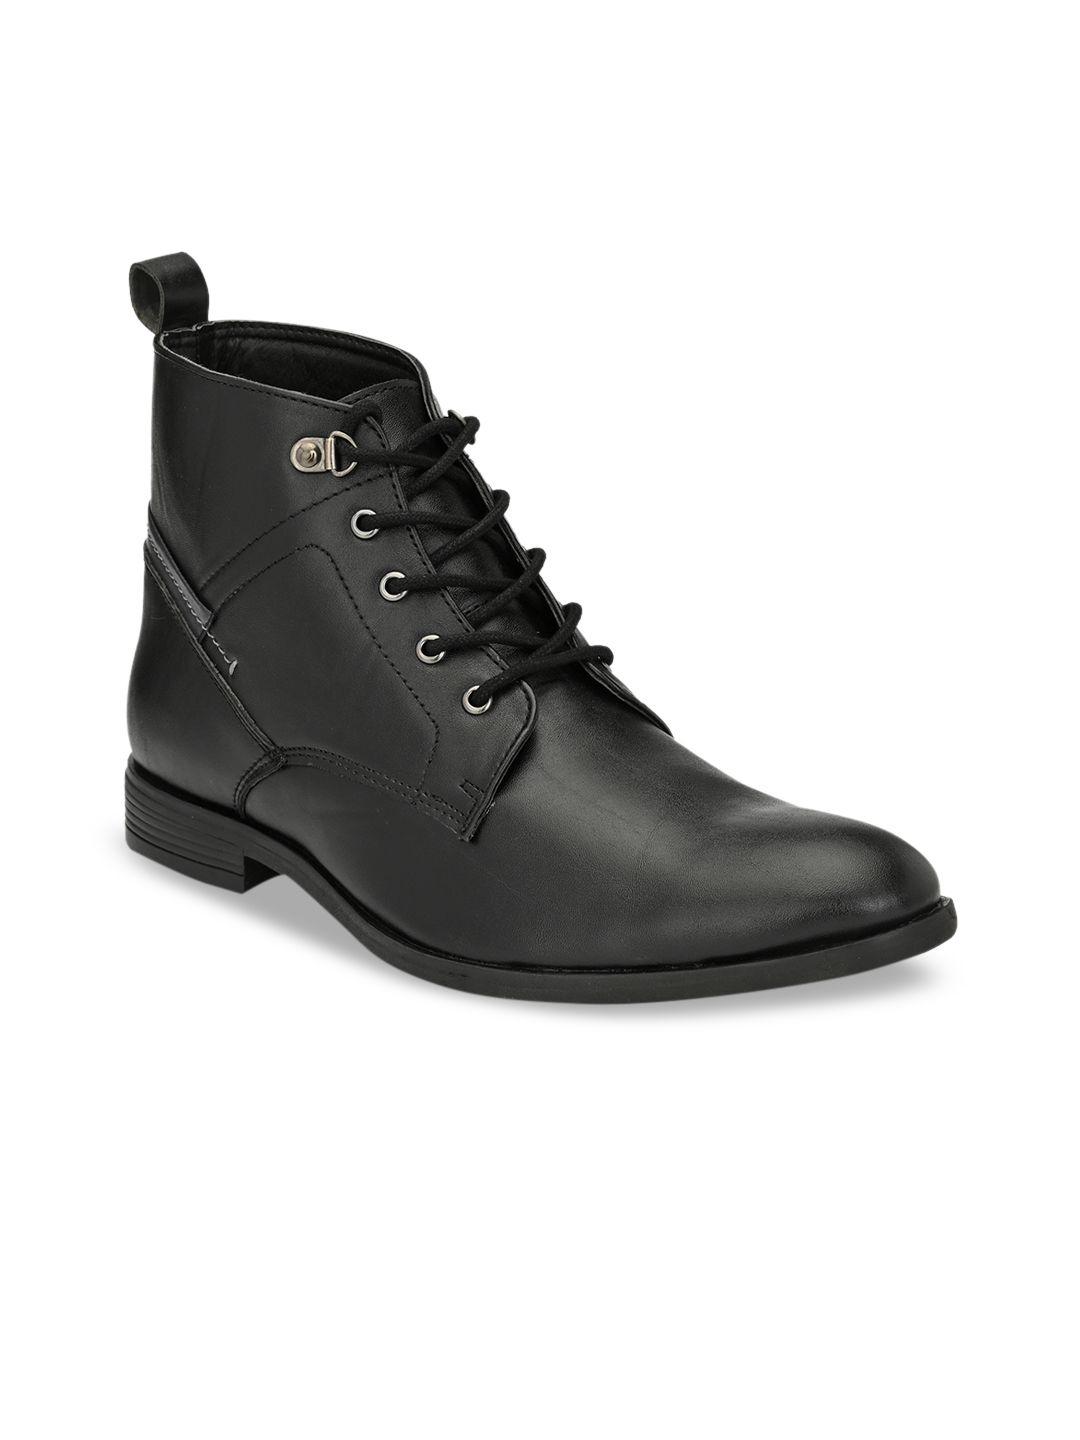 shences men black solid synthetic leather mid-top flat boots